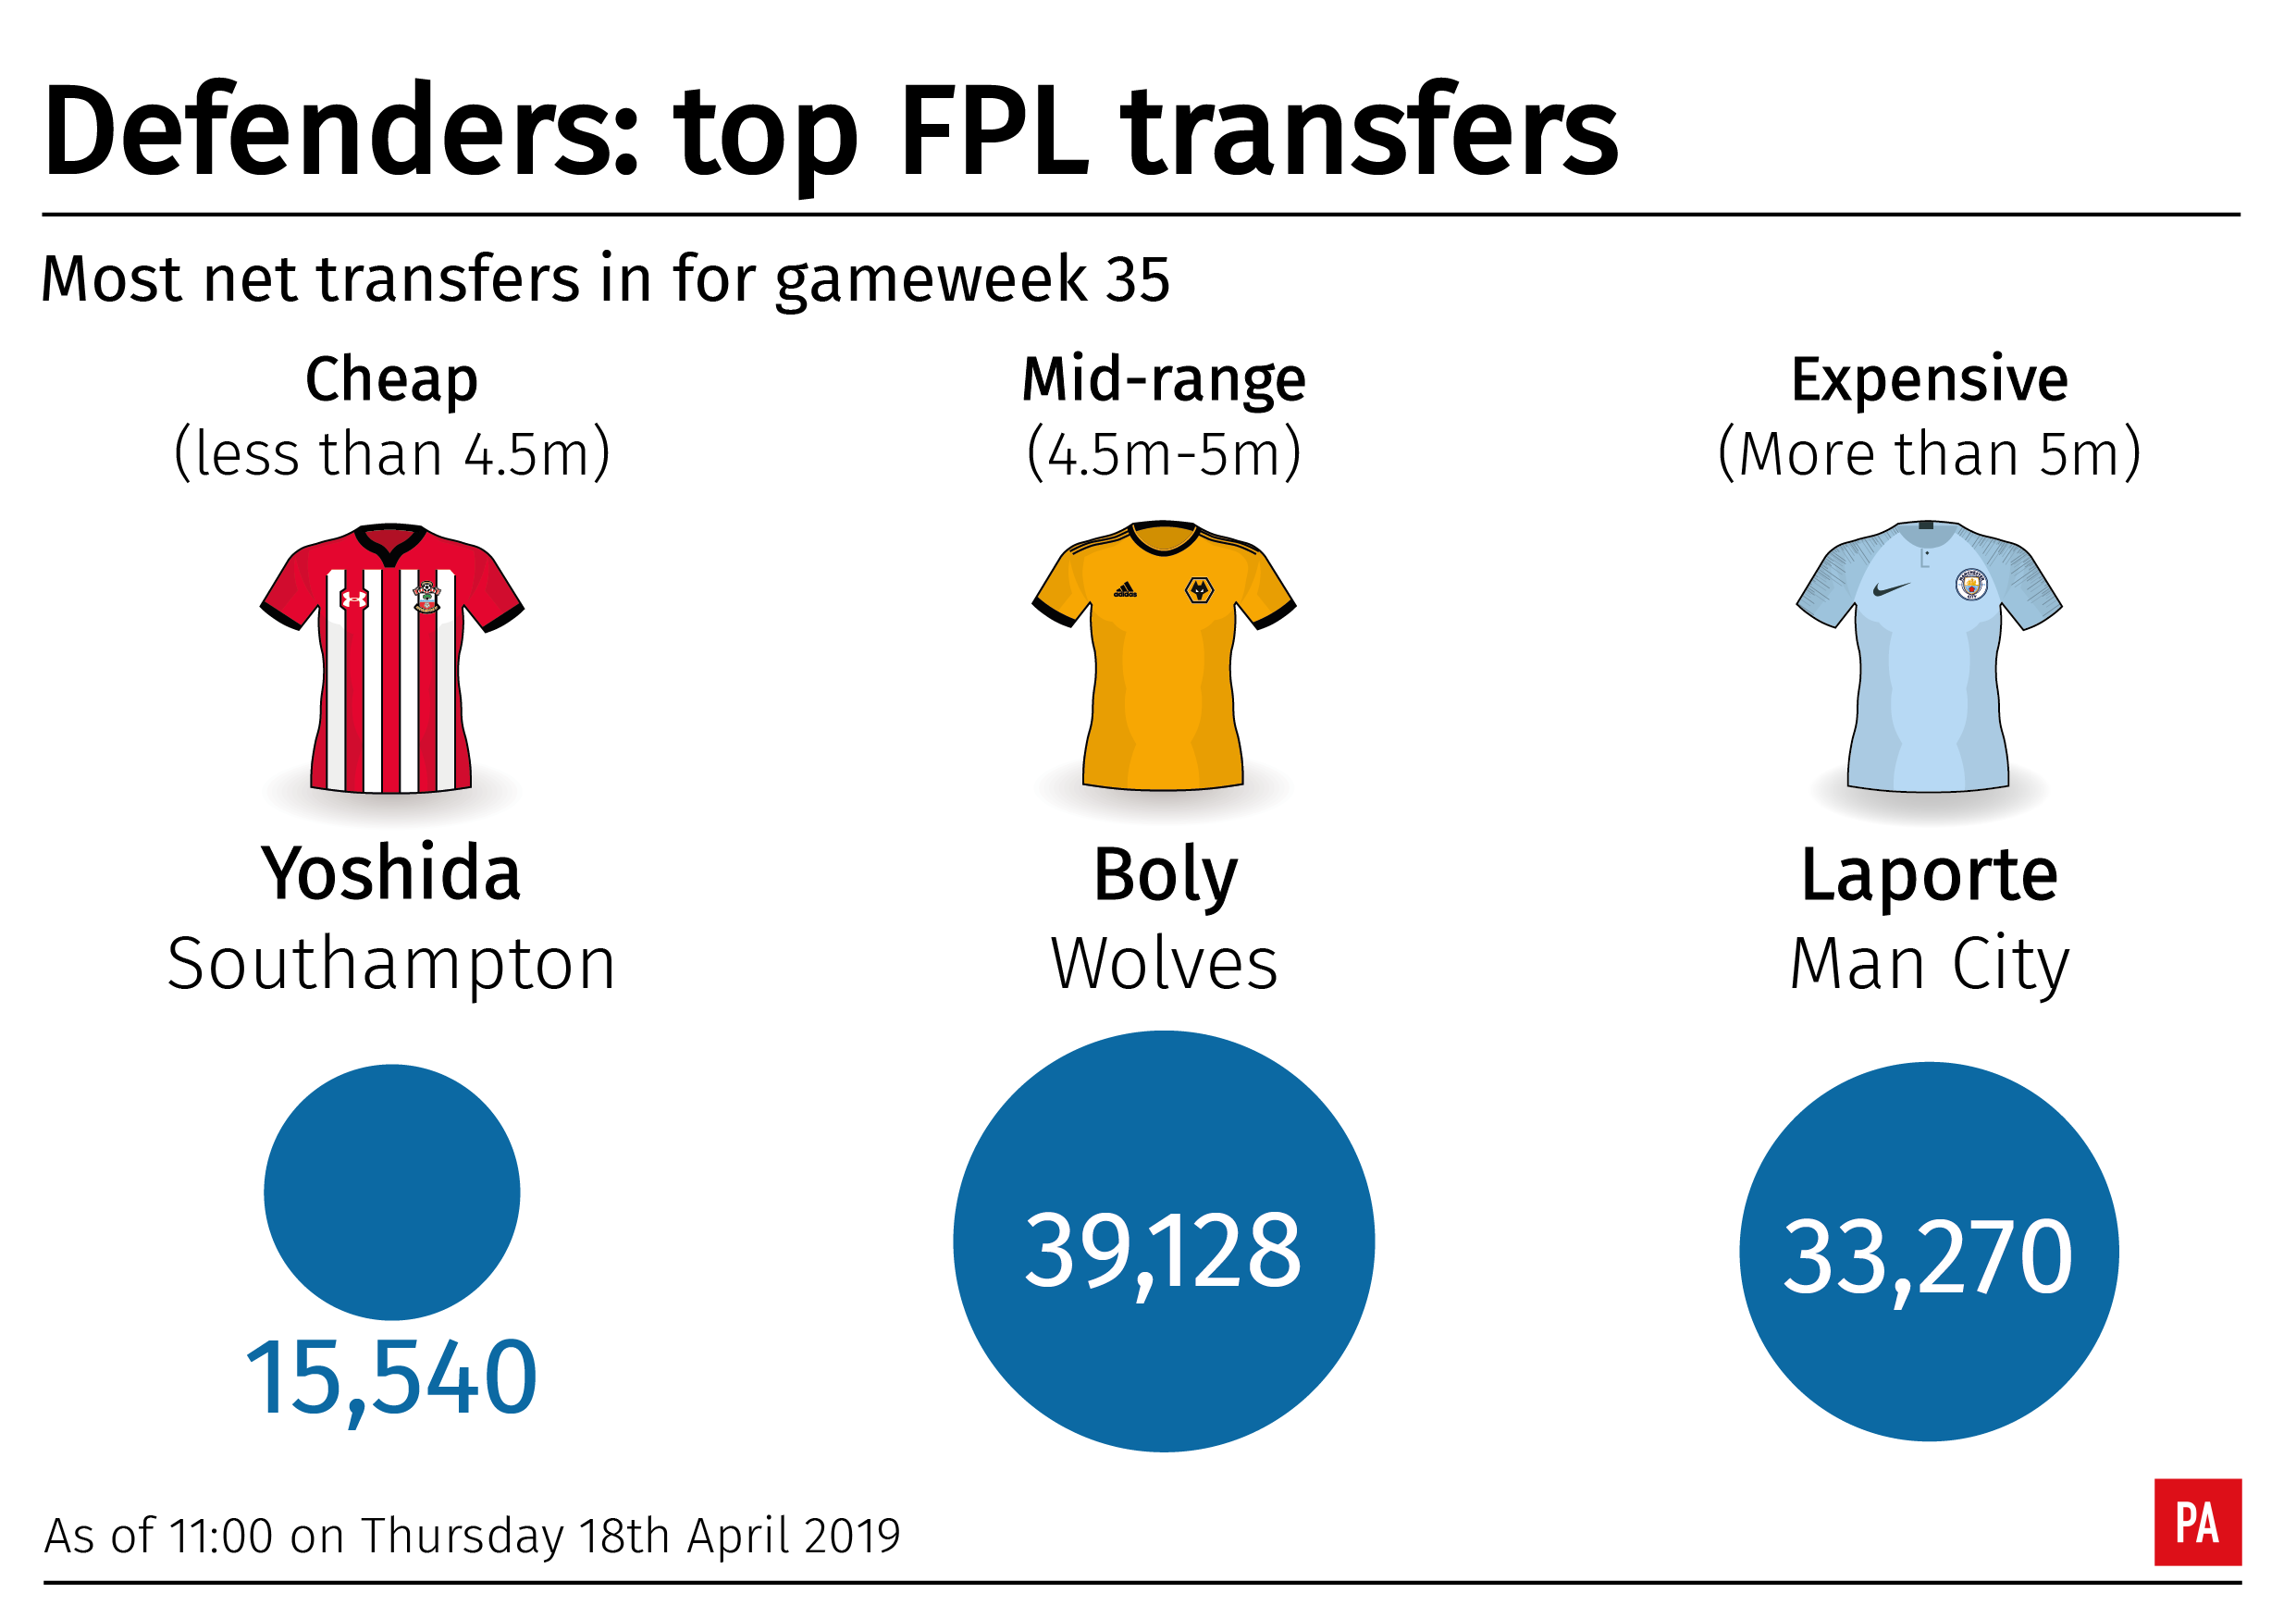 Three of the most popular defenders for Fantasy Premier League managers ahead of gameweek 35